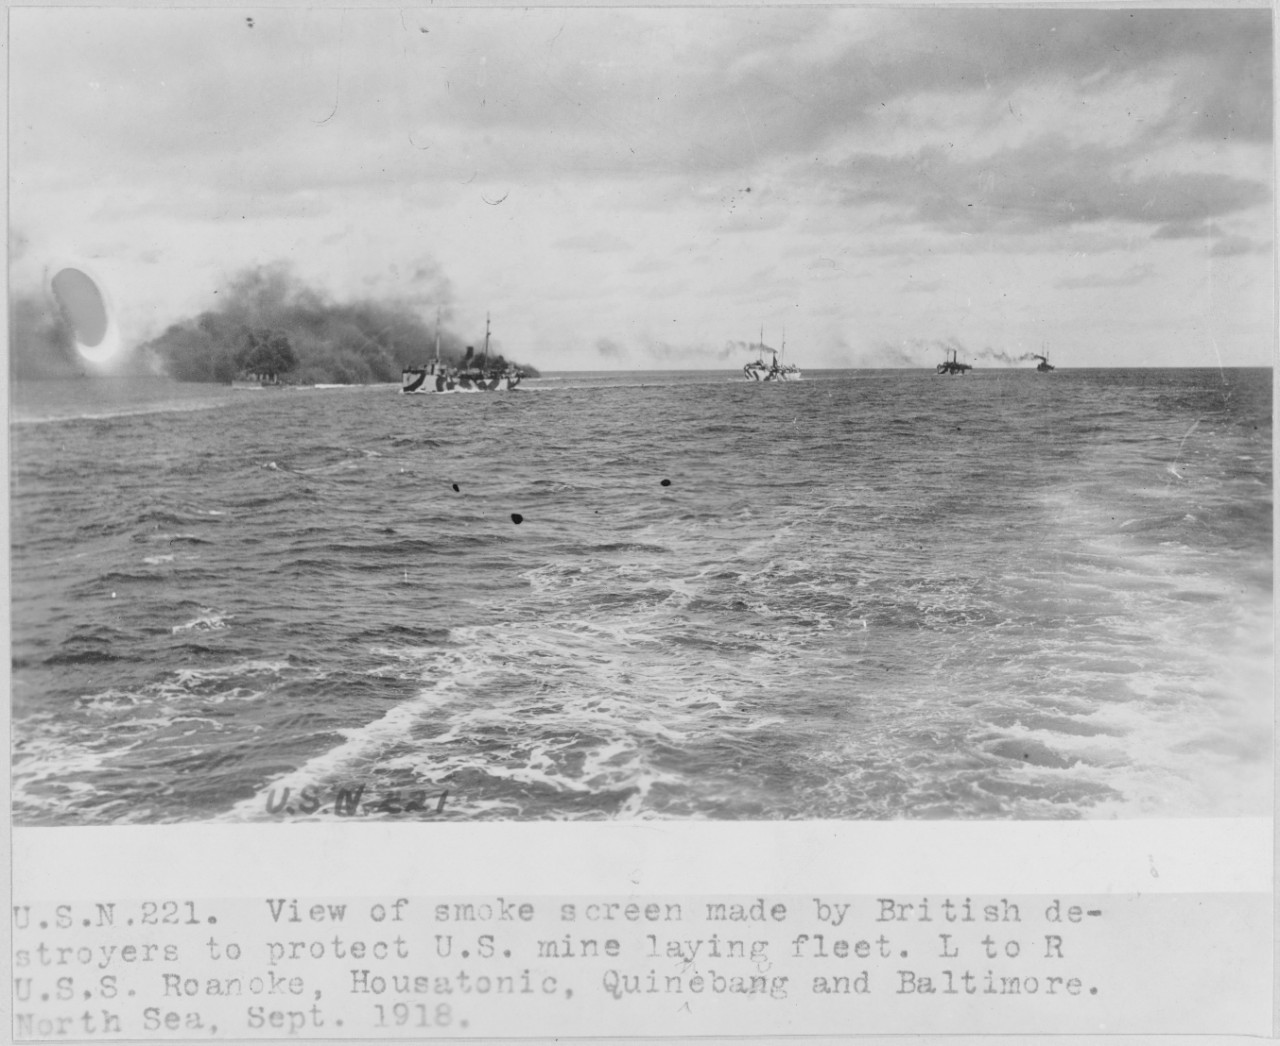 Smoke screen made by British destroyers to protect U.S. Mine Laying Fleet, September 1918